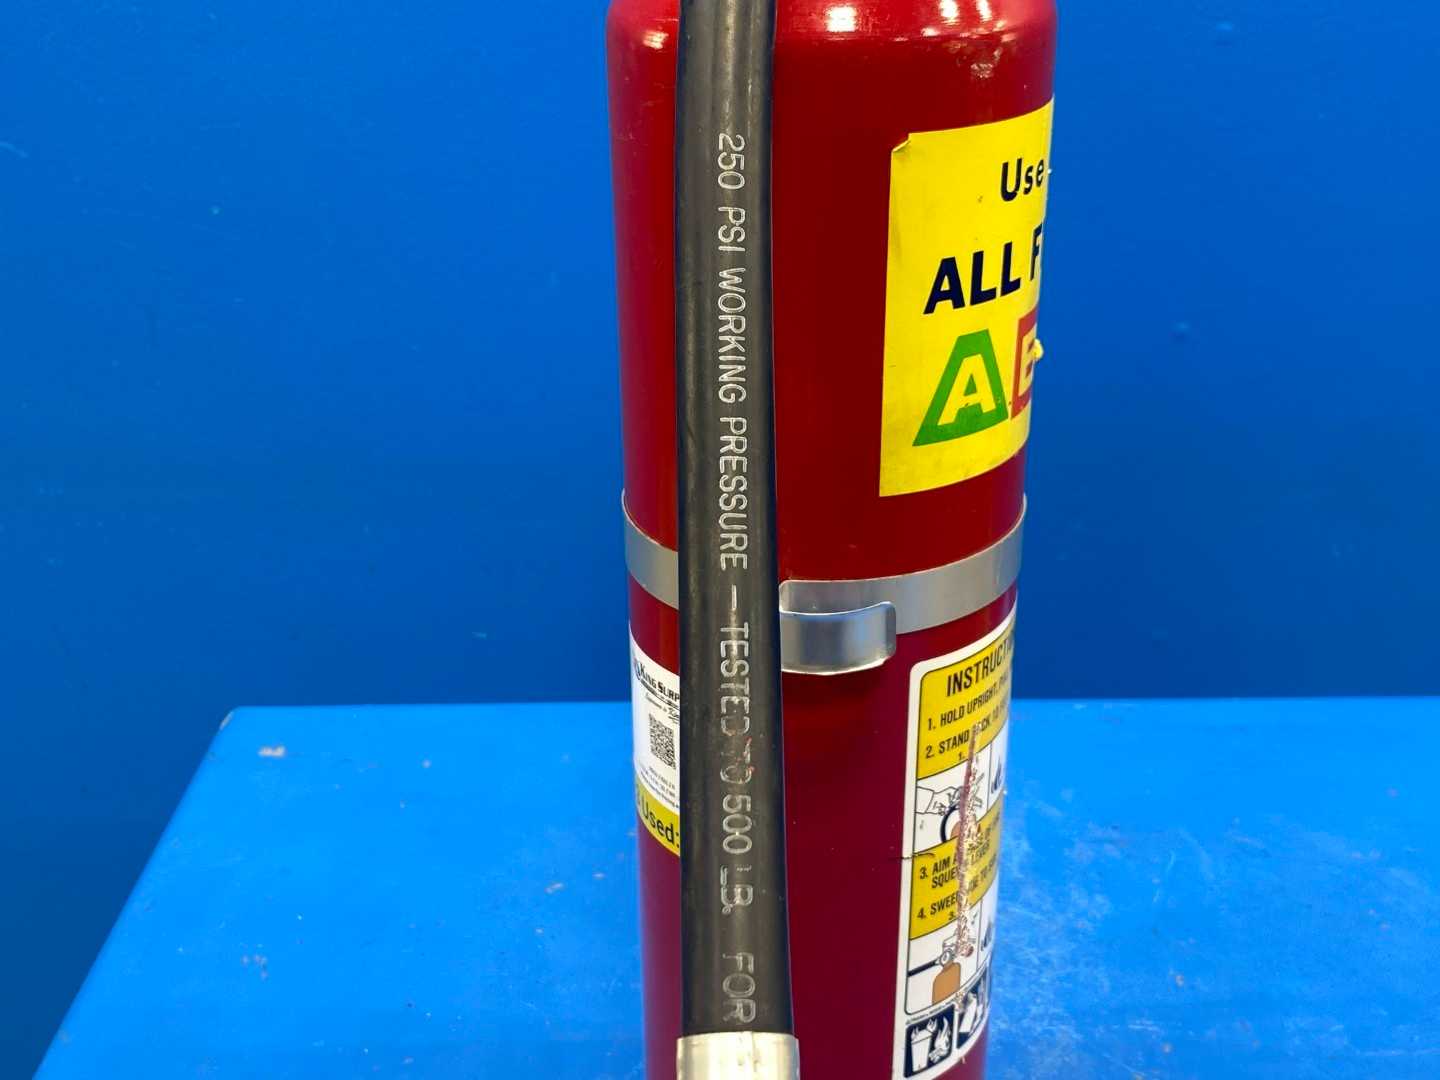 General TGP-10G ABC Fire Extinguisher